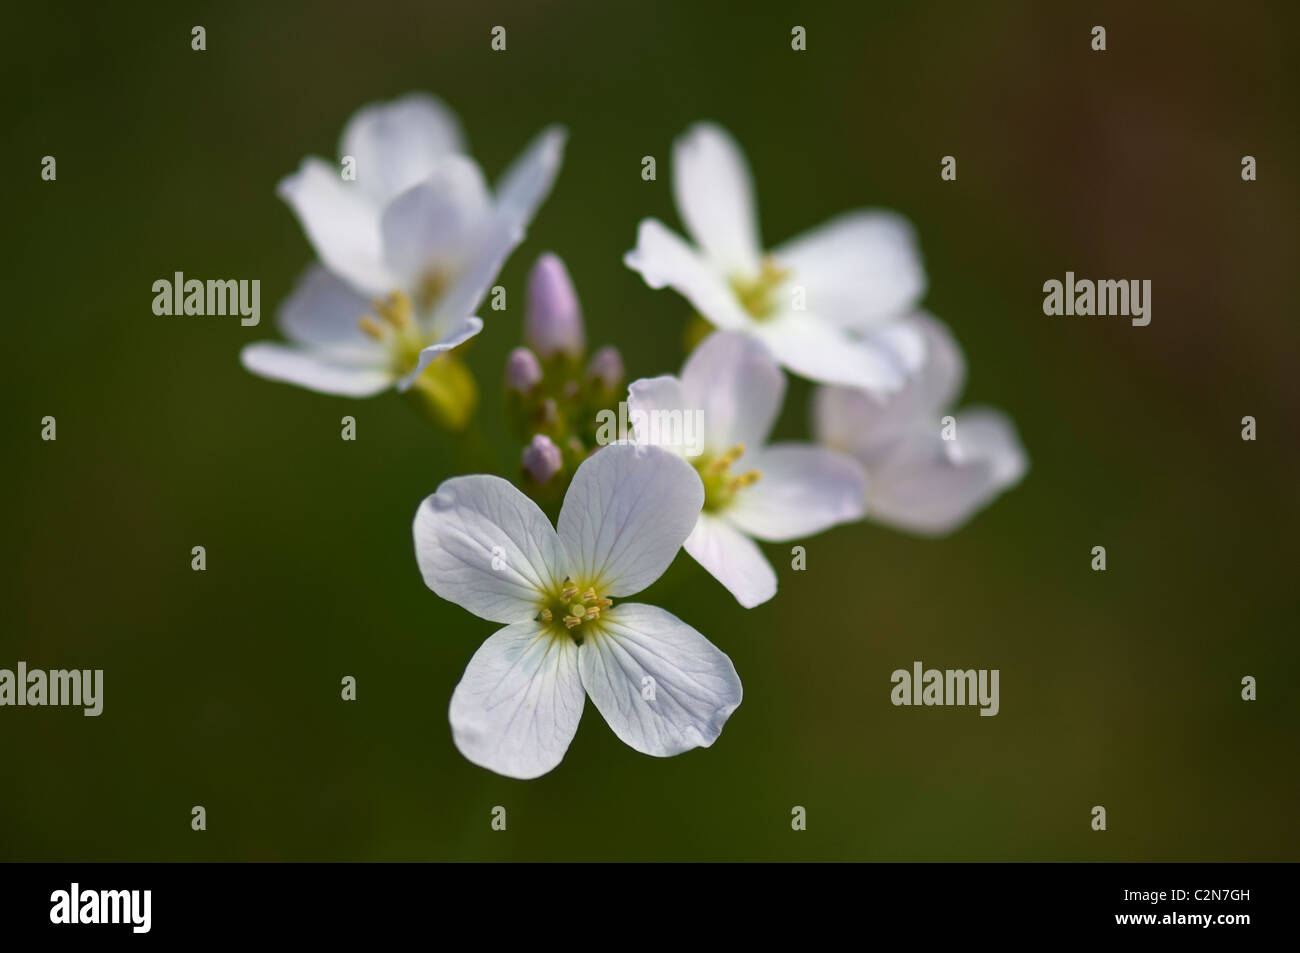 Lady's Smock or Cuckoo Flower. Stock Photo